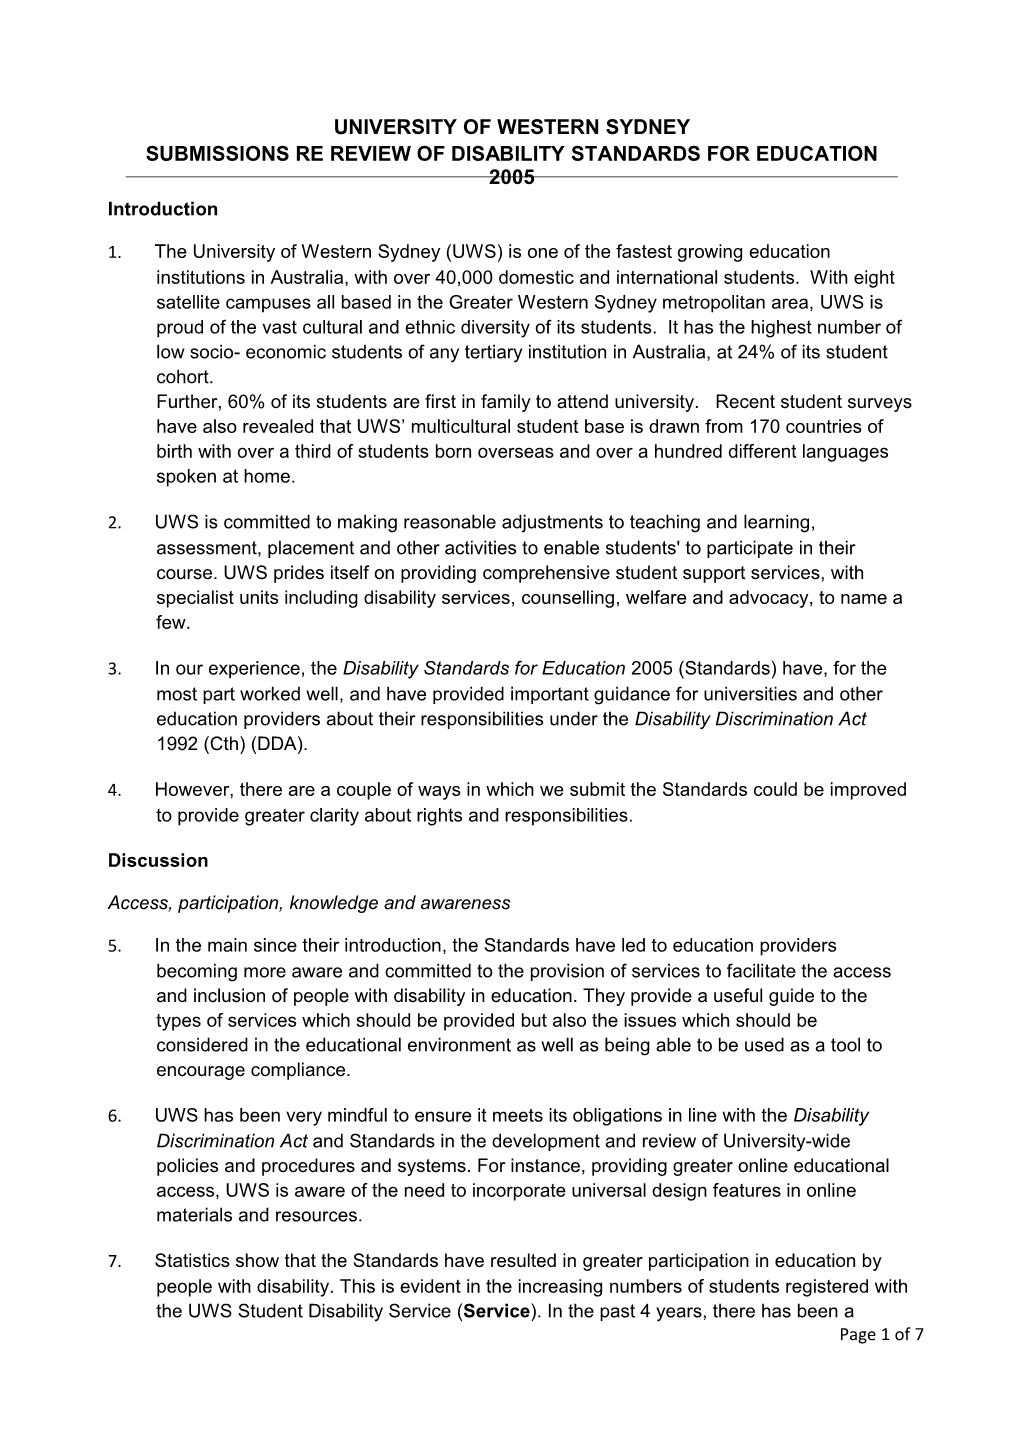 Submissions Re Review of Disability Standards for Education 2005